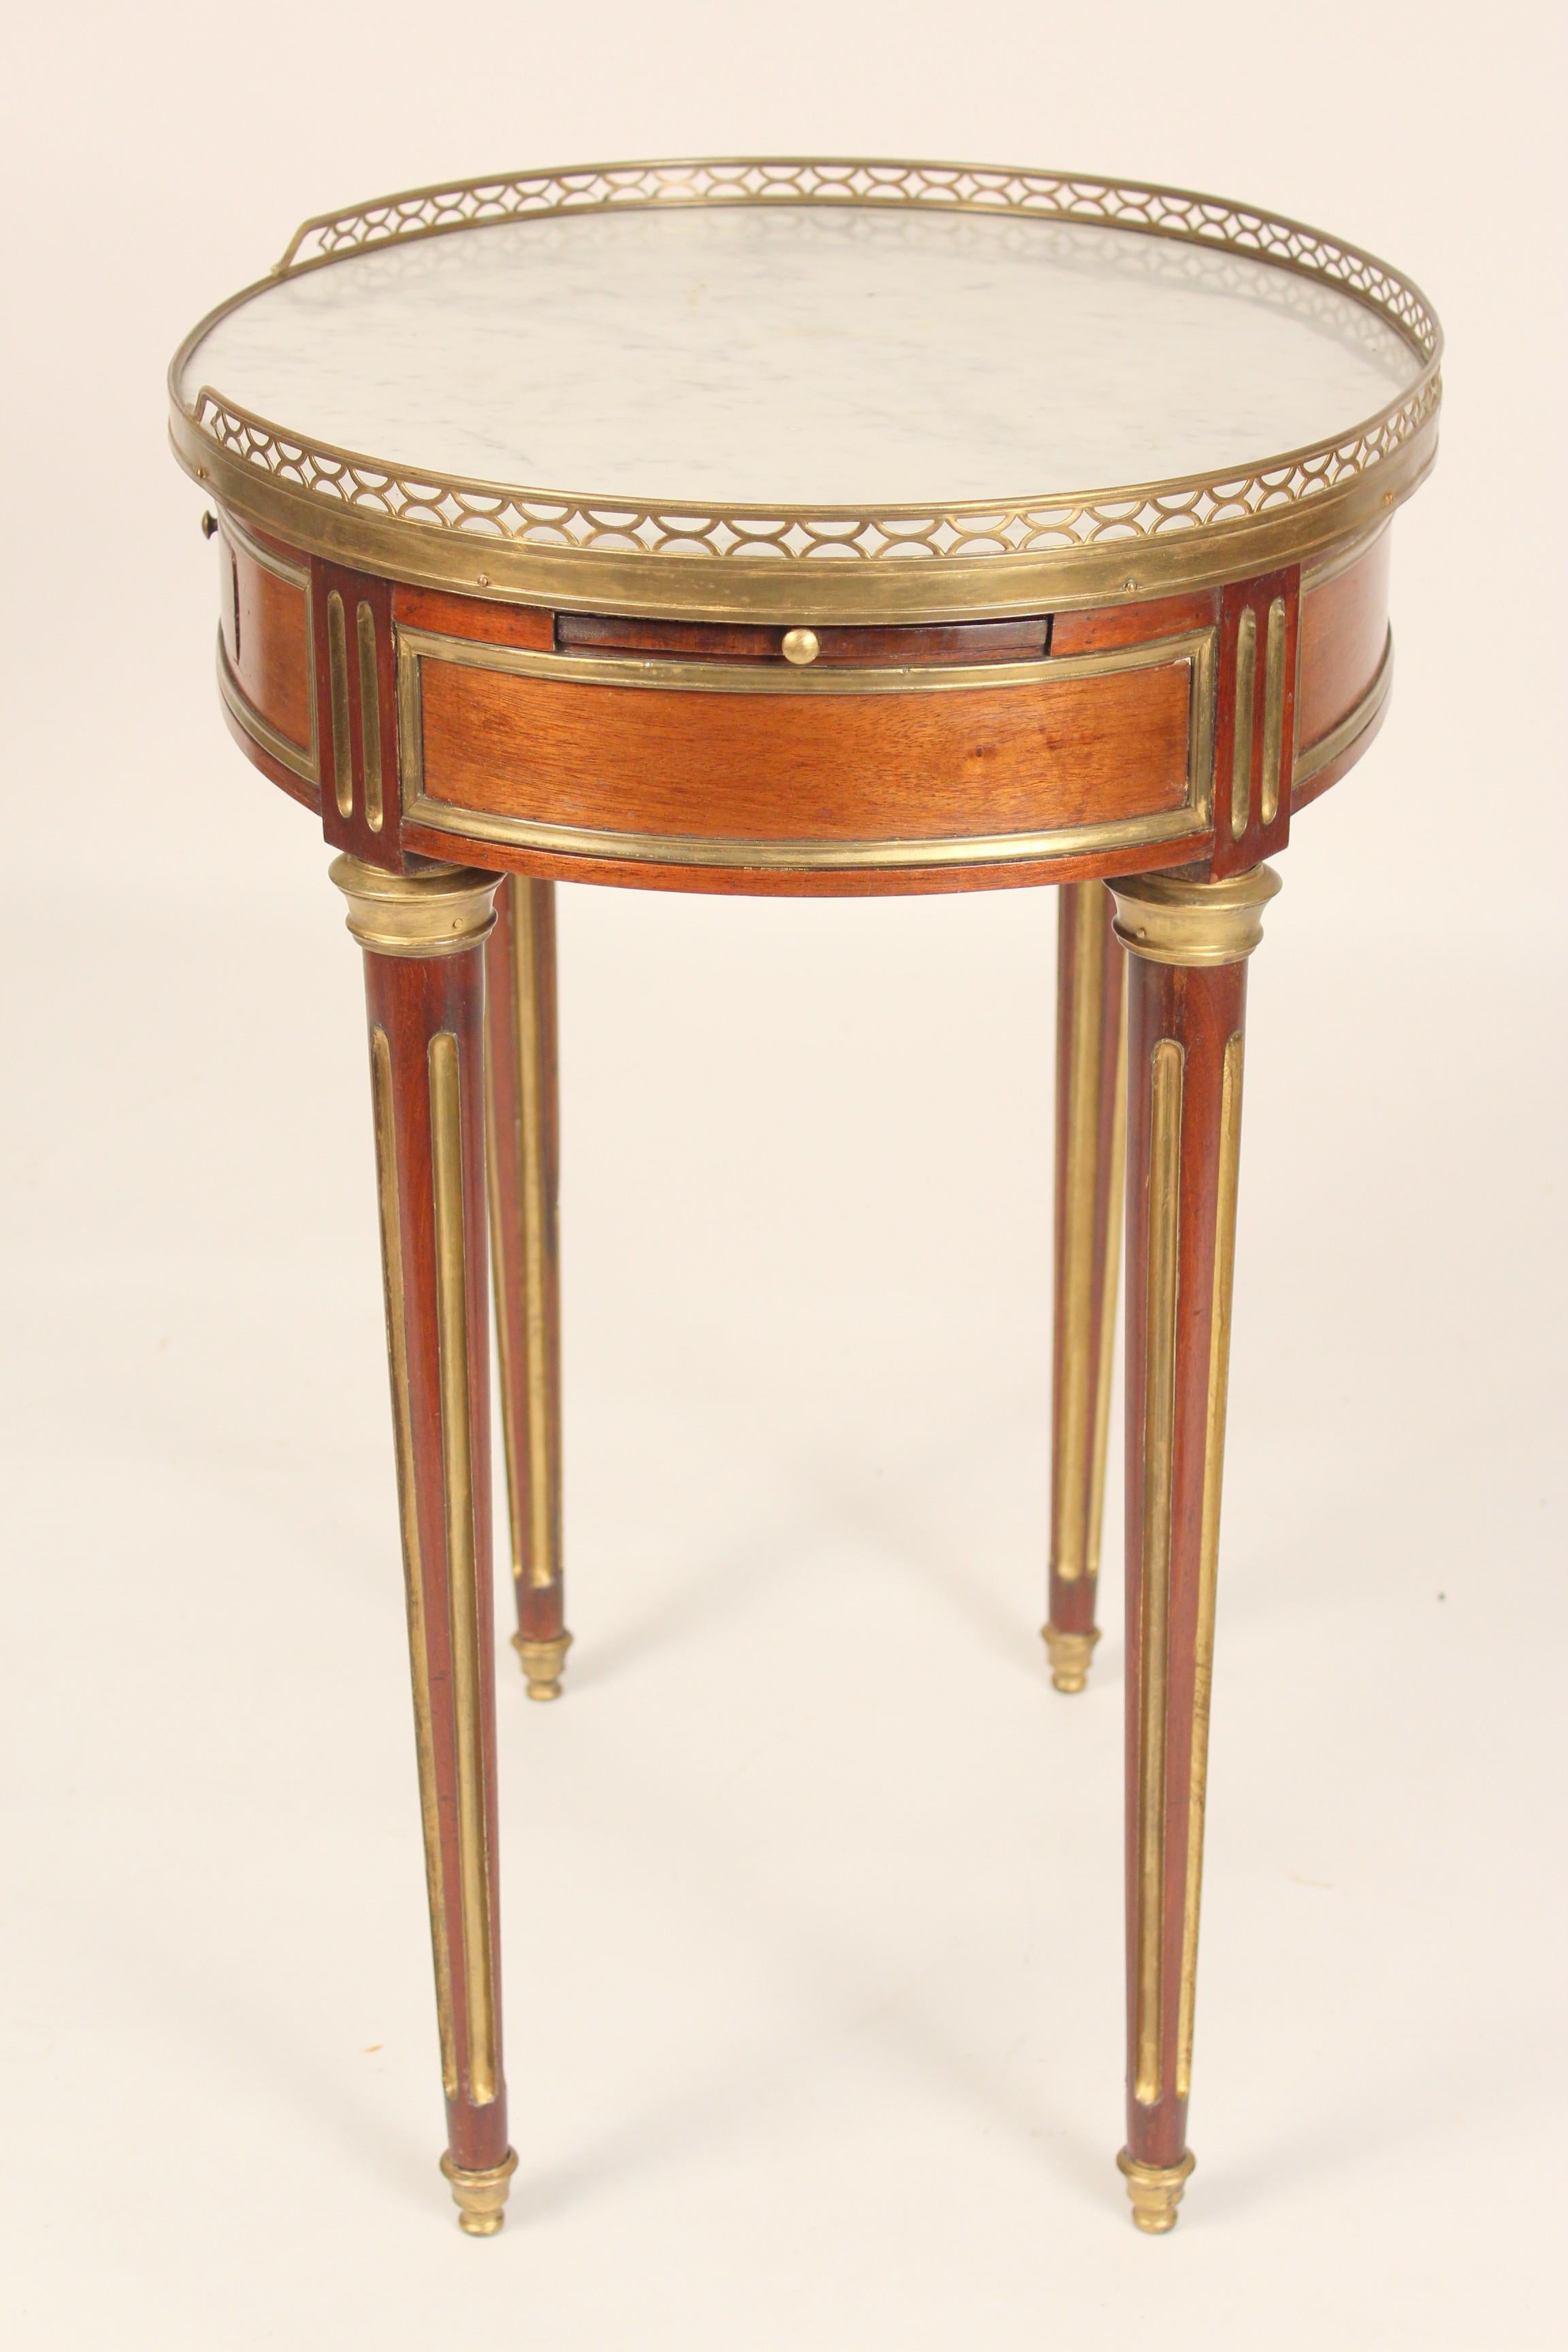 Antique Louis XVI Style Brass Mounted Mahogany Occasional Table In Good Condition For Sale In Laguna Beach, CA